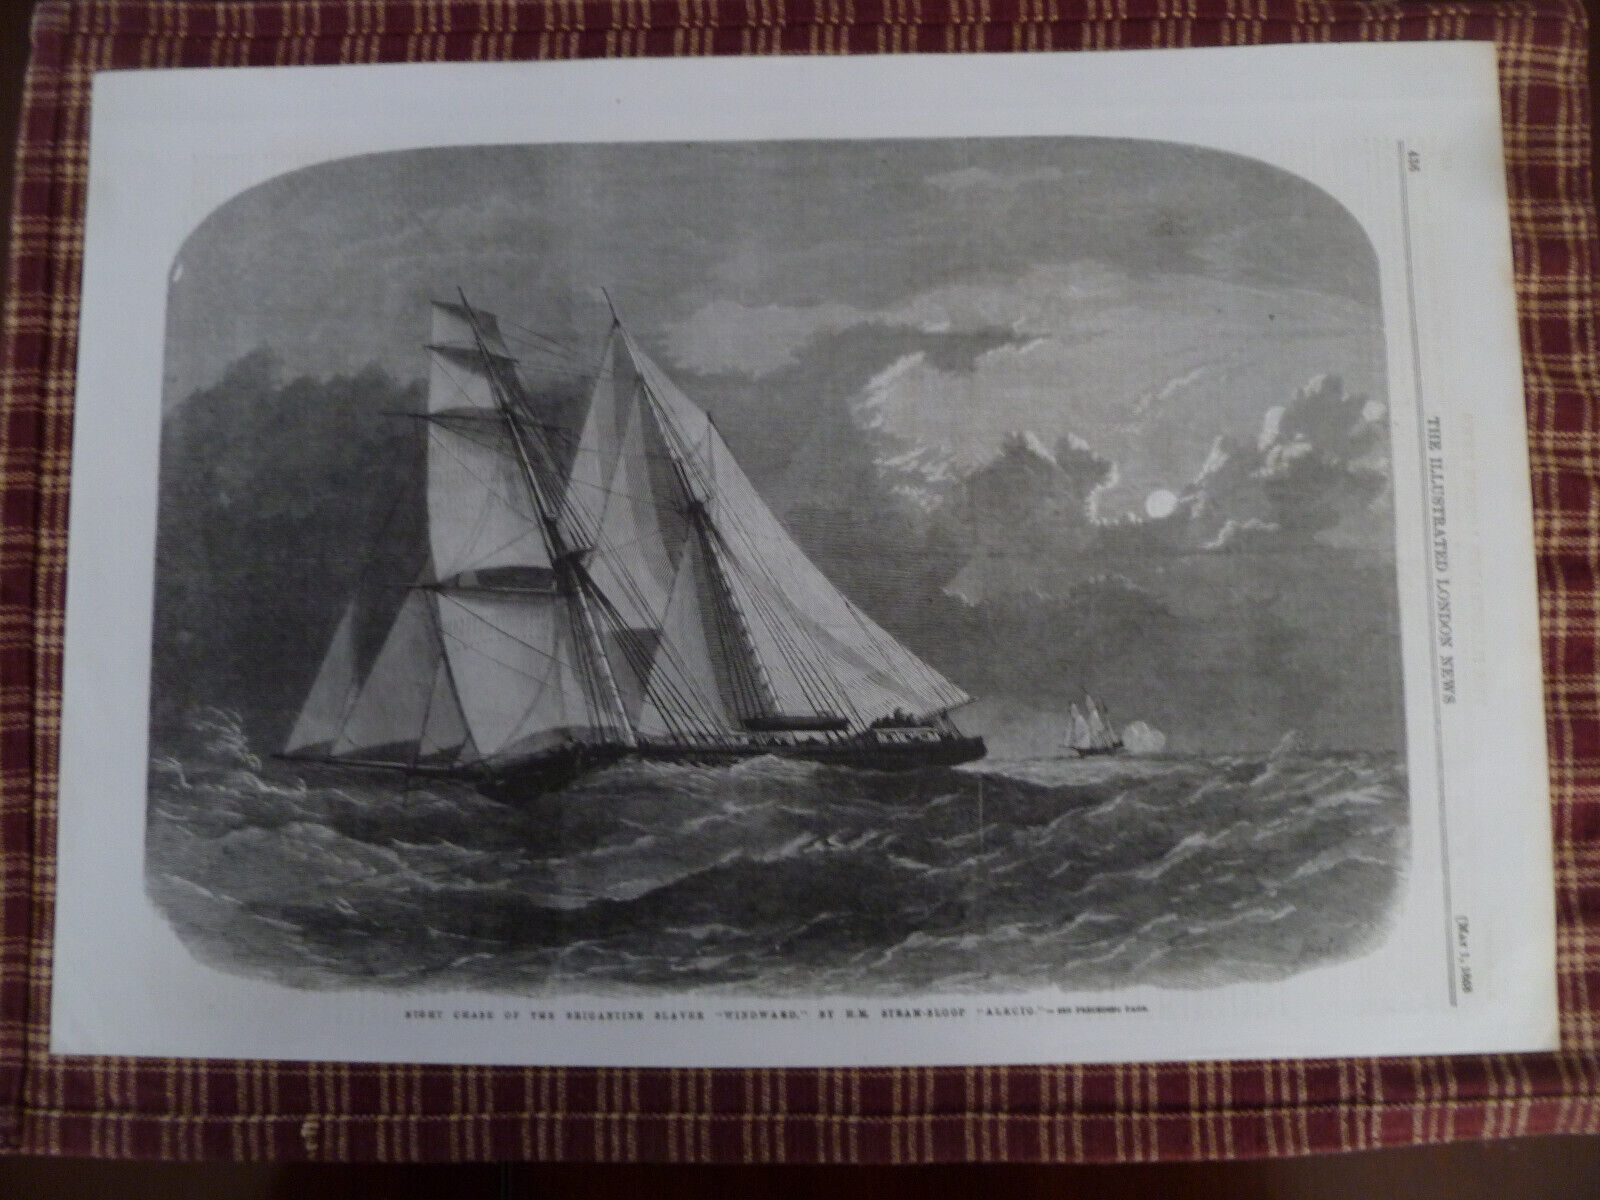 7 Pages of  SAILING SHIPS-Engravings-1800s-Ballou's-London Illustrated-Gleason's